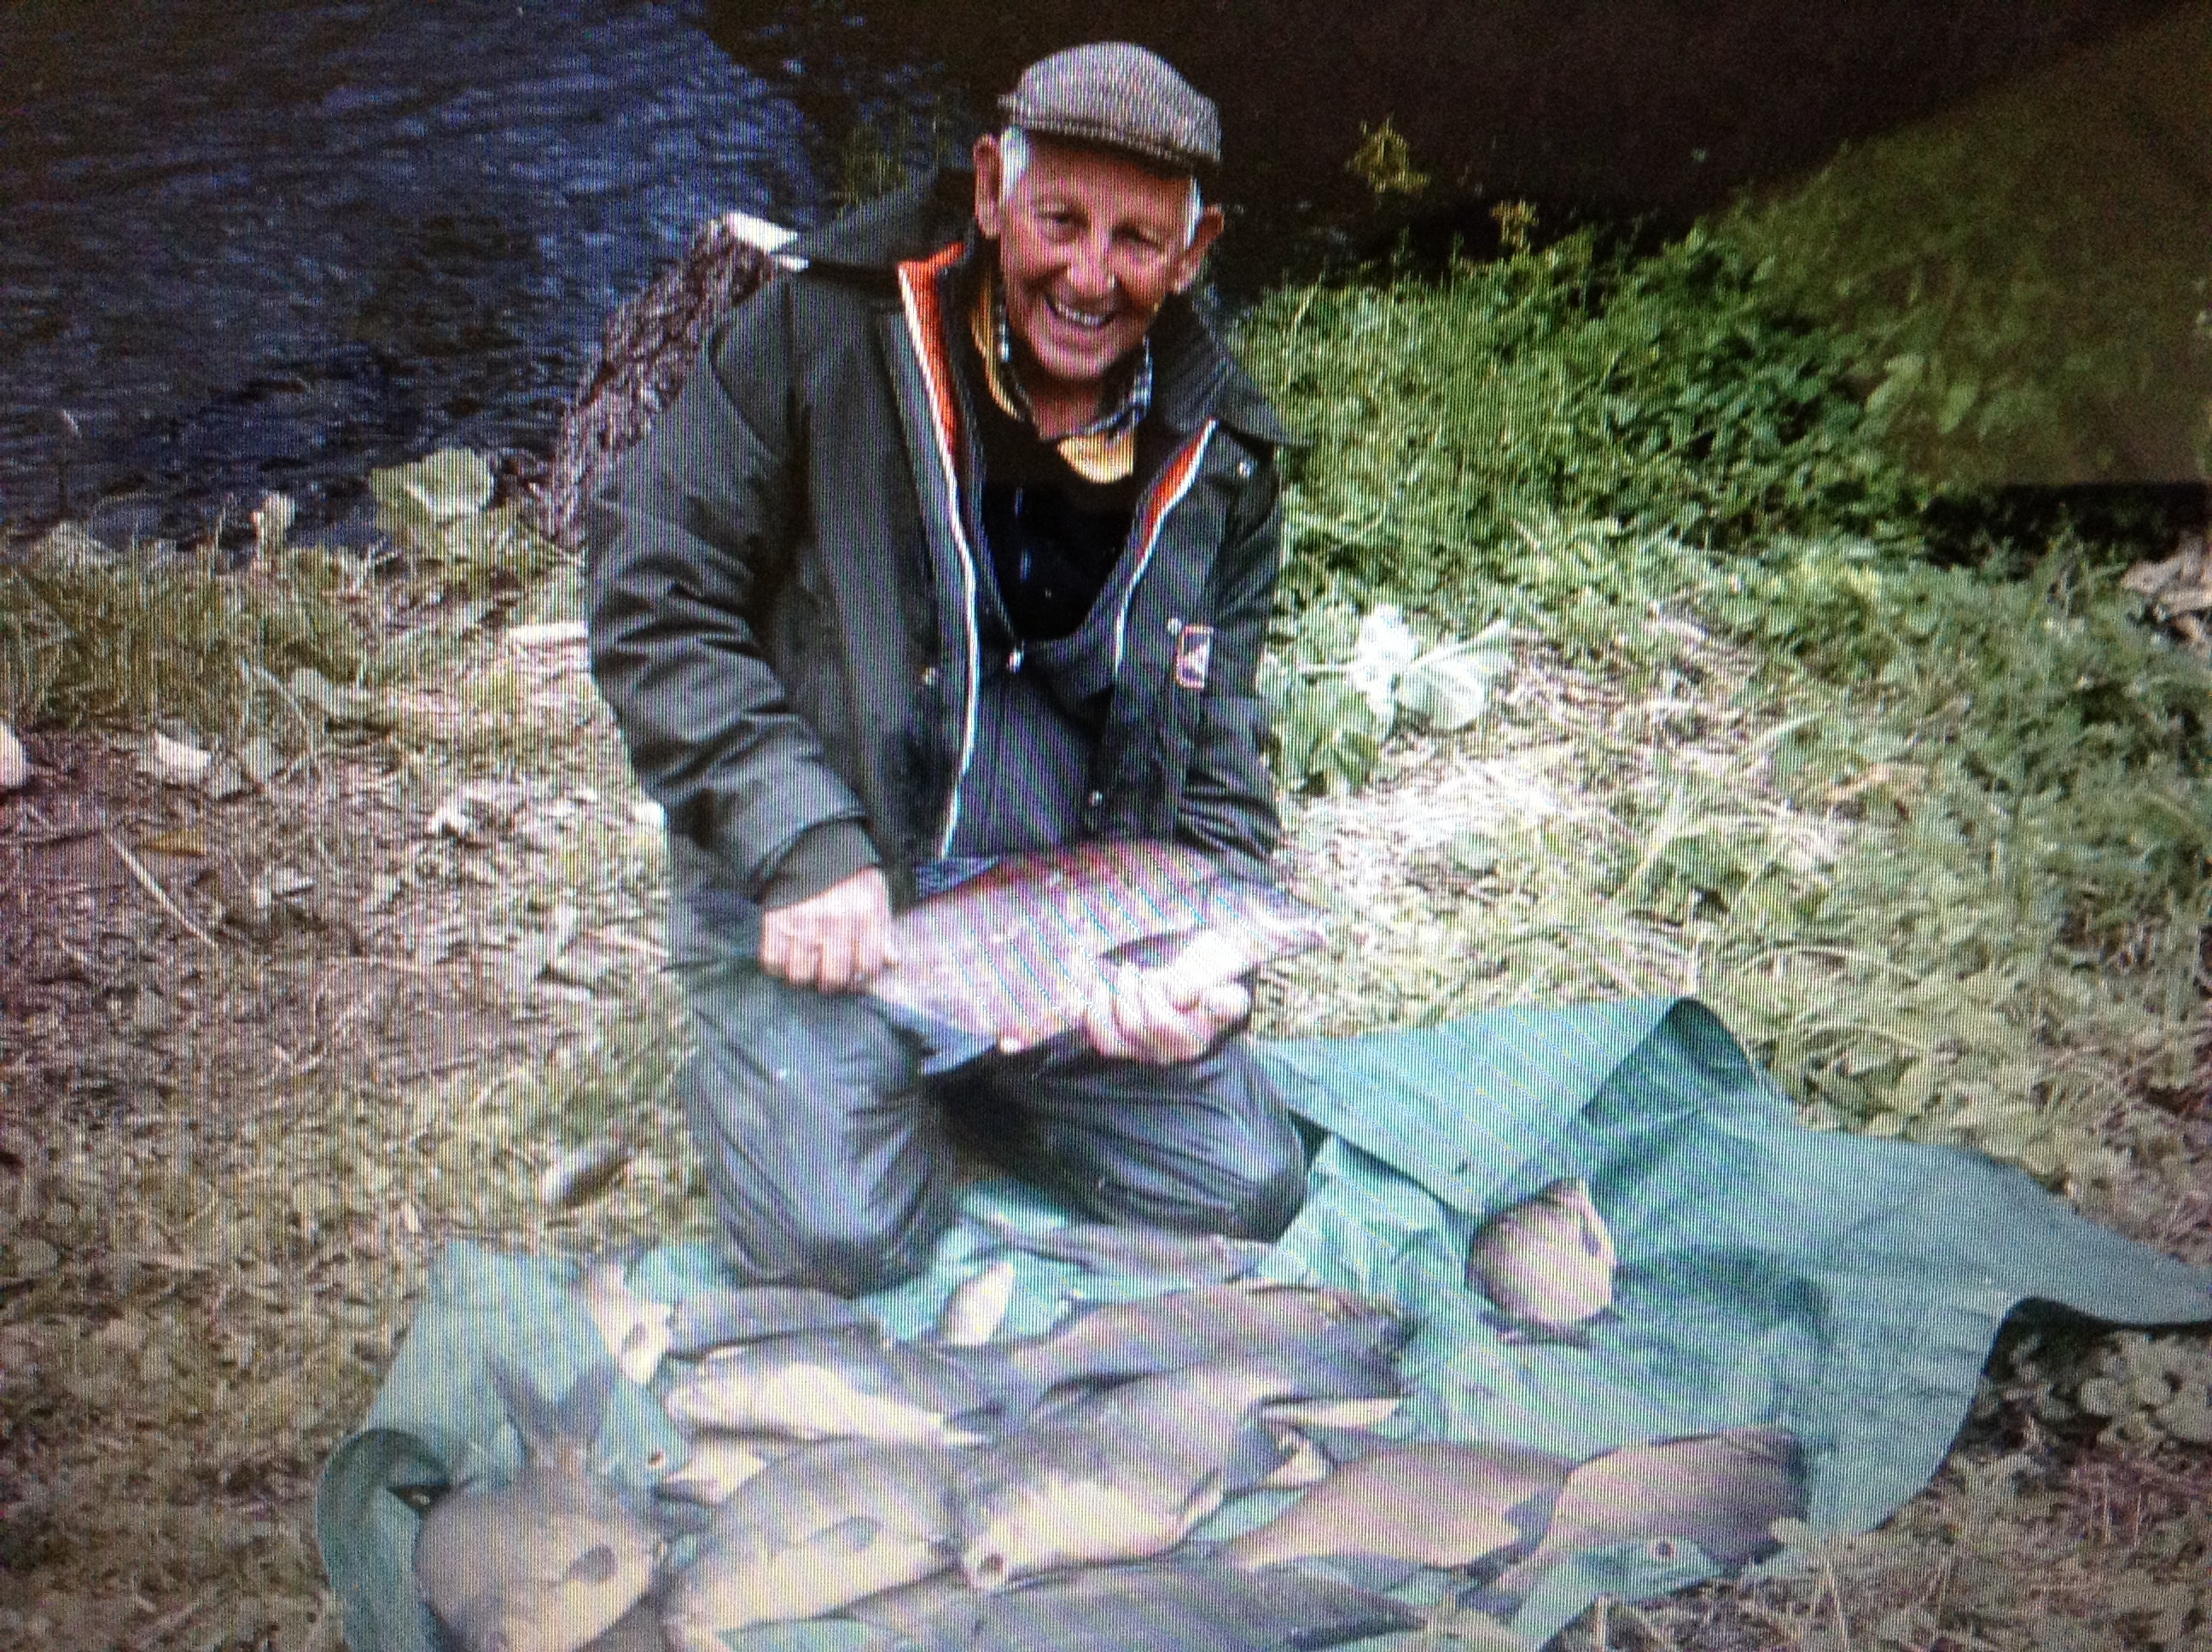 George Ivetts 48lb catch of bream taken at folly drove